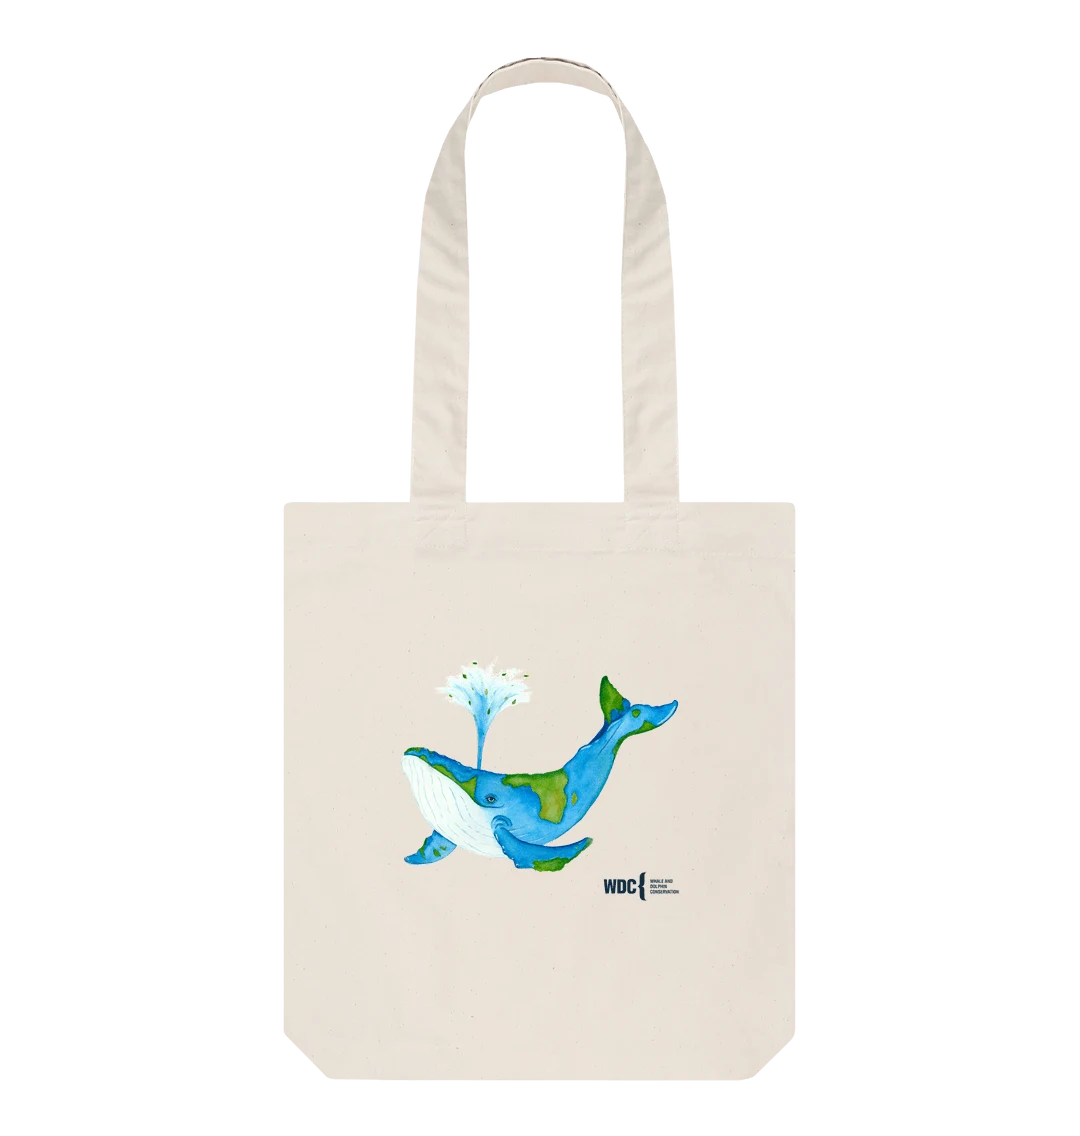 whale Store earth whale tote bag